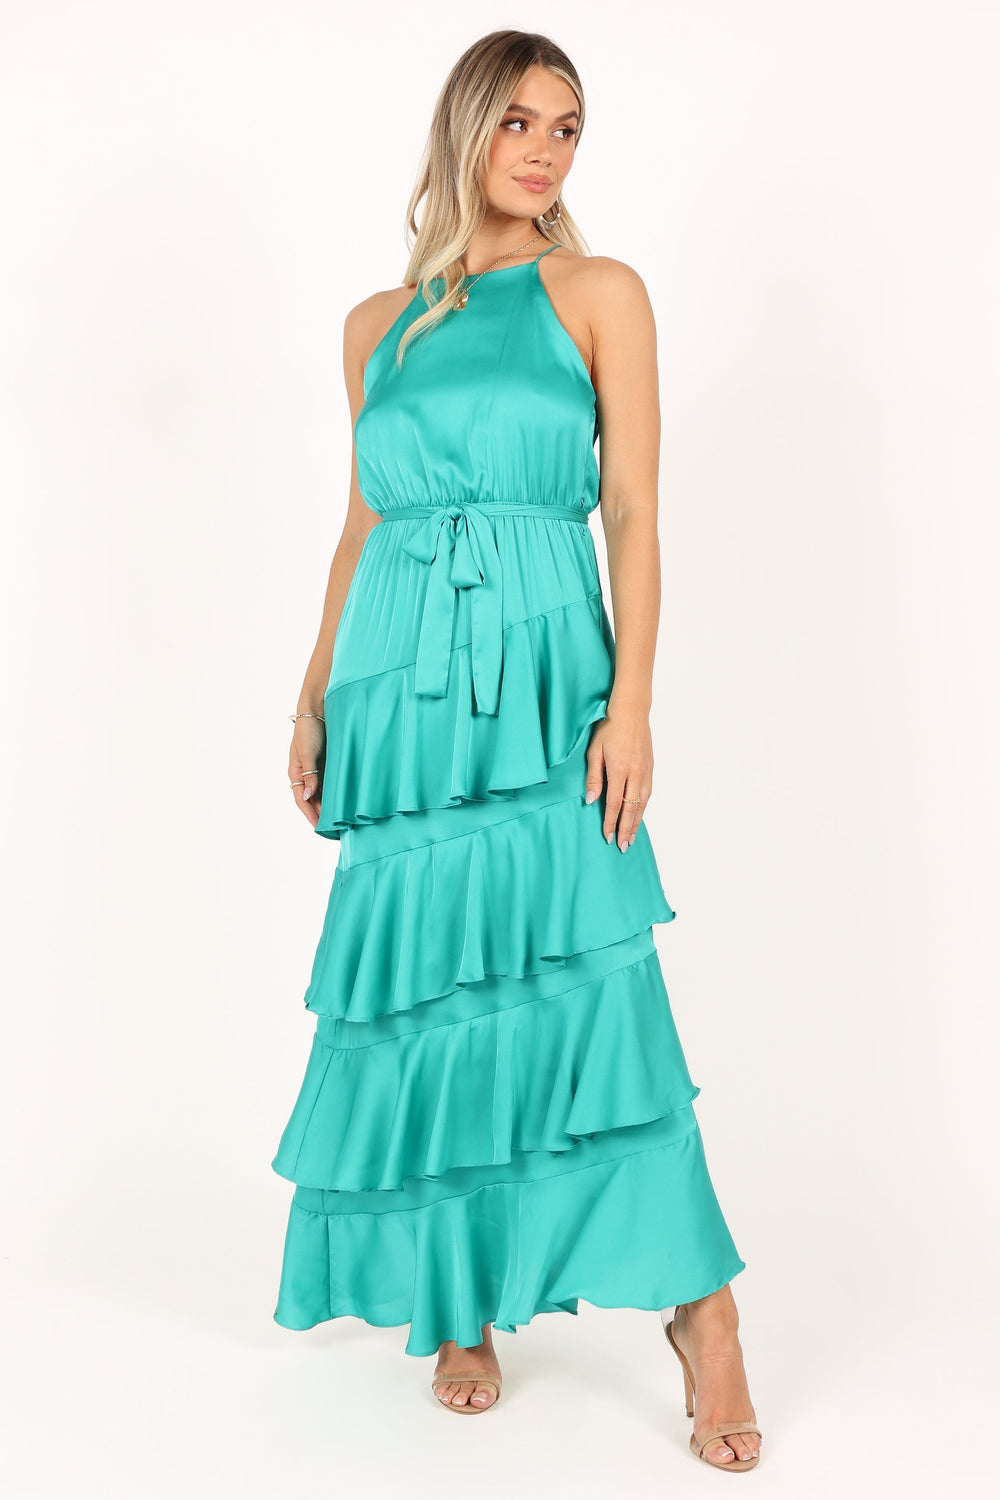 Petal and Pup USA DRESSES Annalise Tiered Maxi Dress - Teal